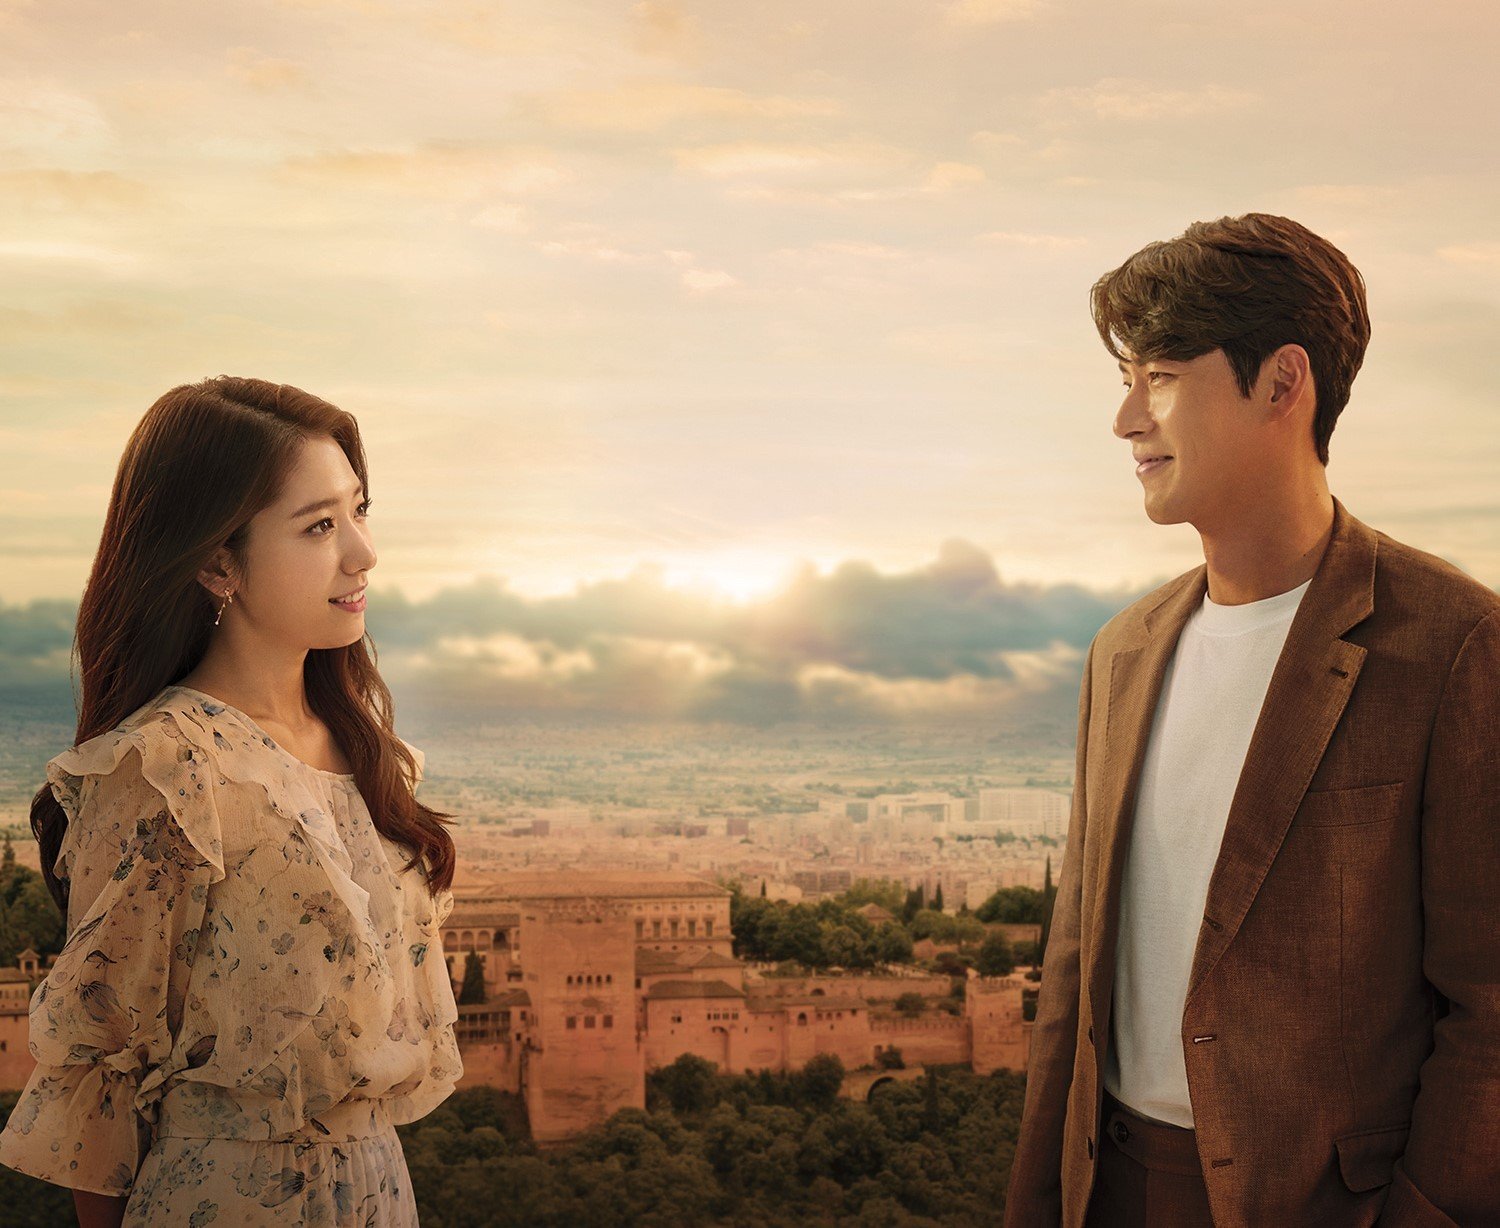 The South Korean romantic drama television series, ‘Memories of the Alhambra’, starring Park Shin-hye (left) and Hyun Bin, will be launched worldwide by Netflix from December 1. Photo: Netflix